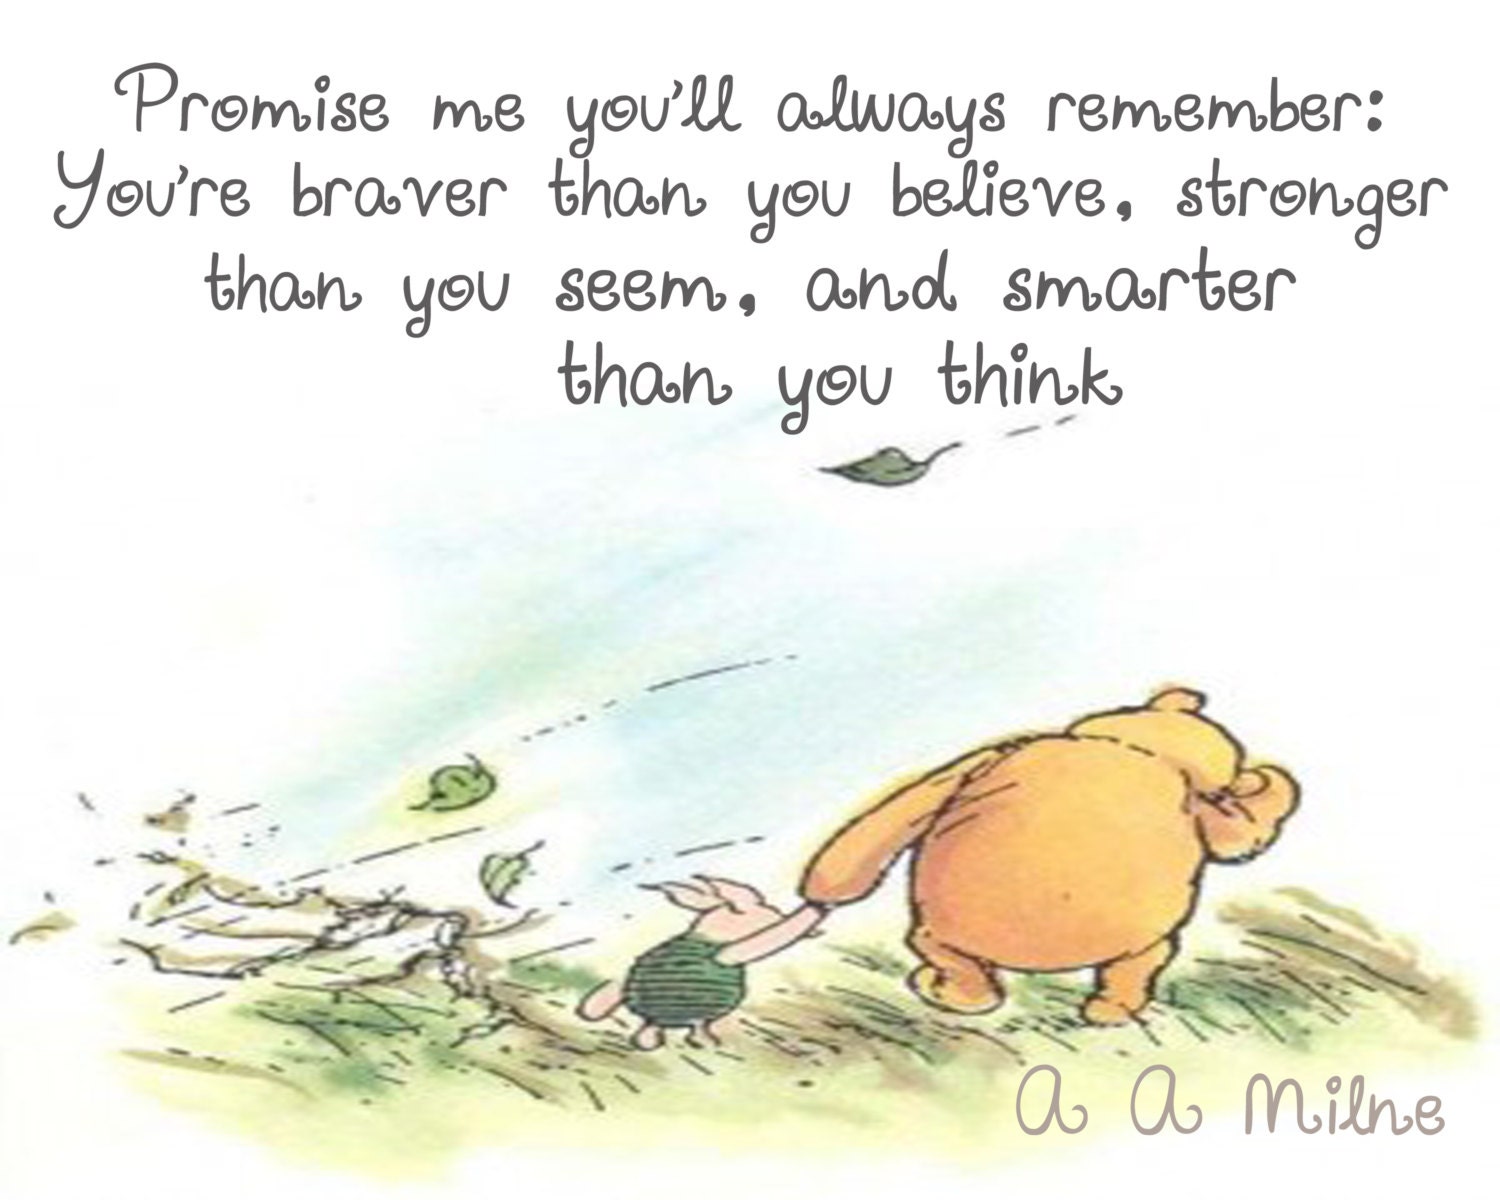 Winnie the Pooh (Character) - Quotes